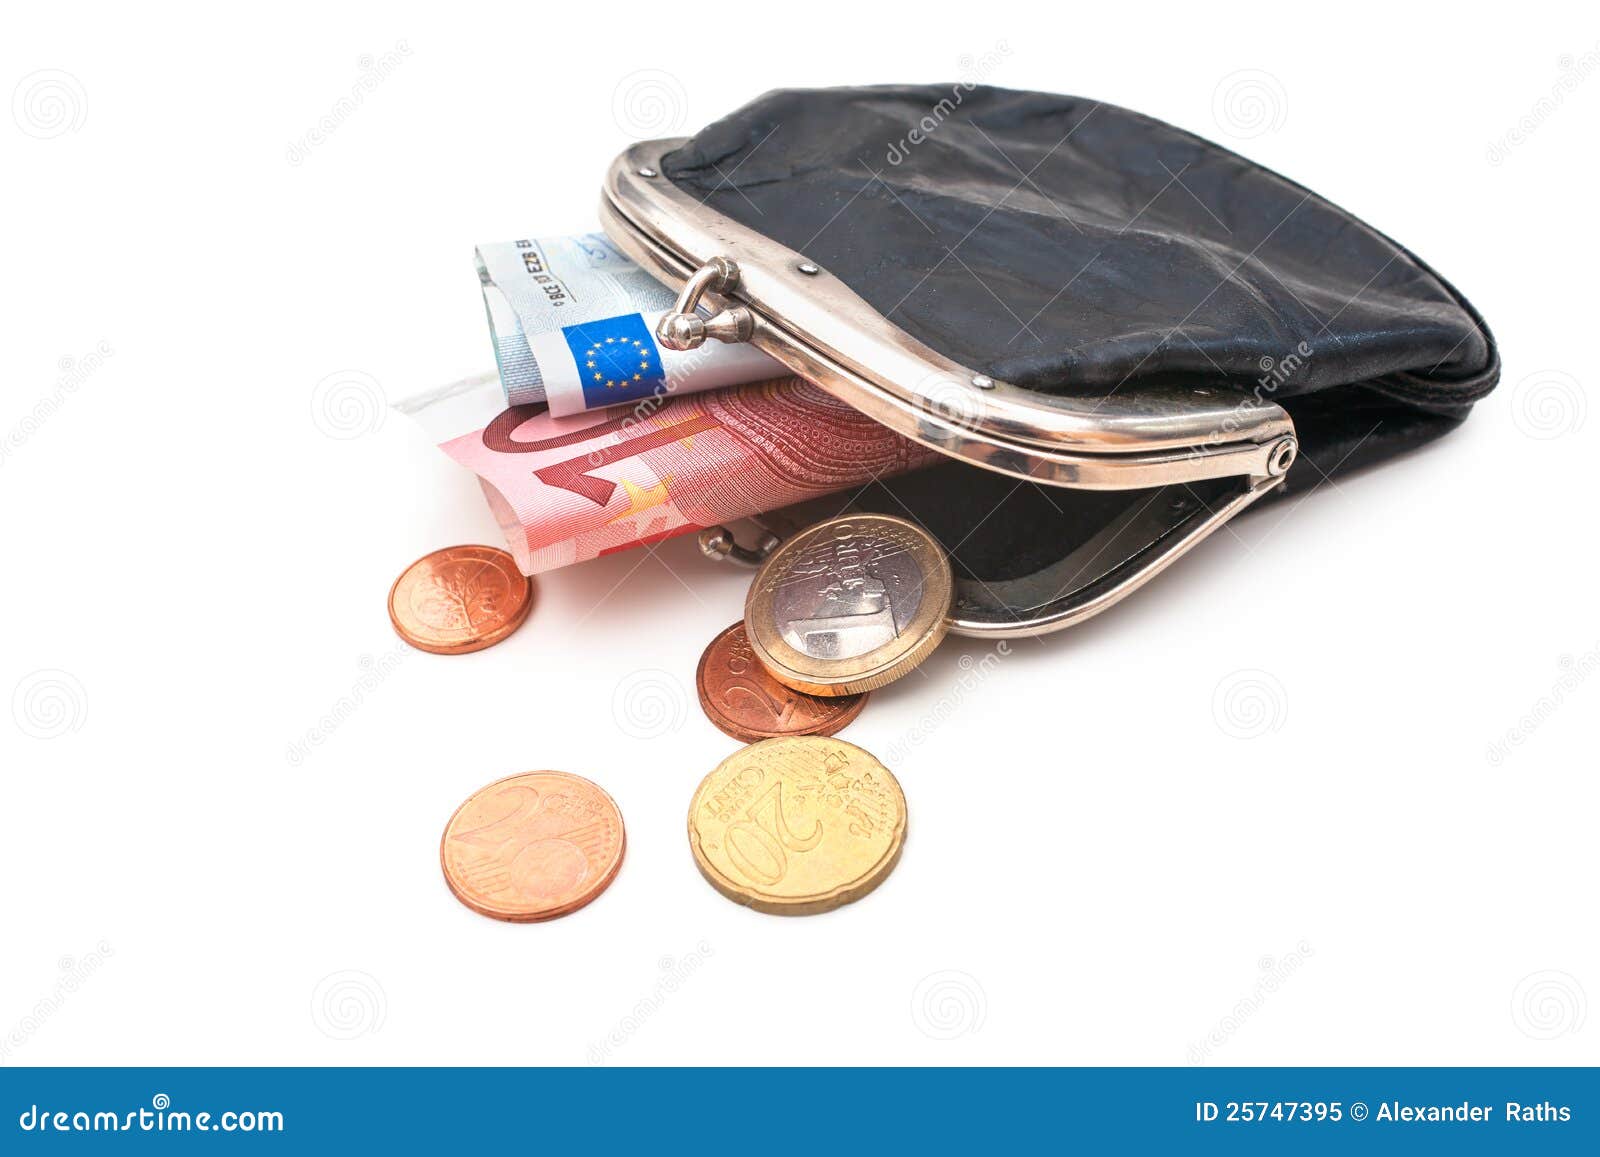 Seniors Wallet With Euro Currency Stock Image - Image of euro, object: 25747395